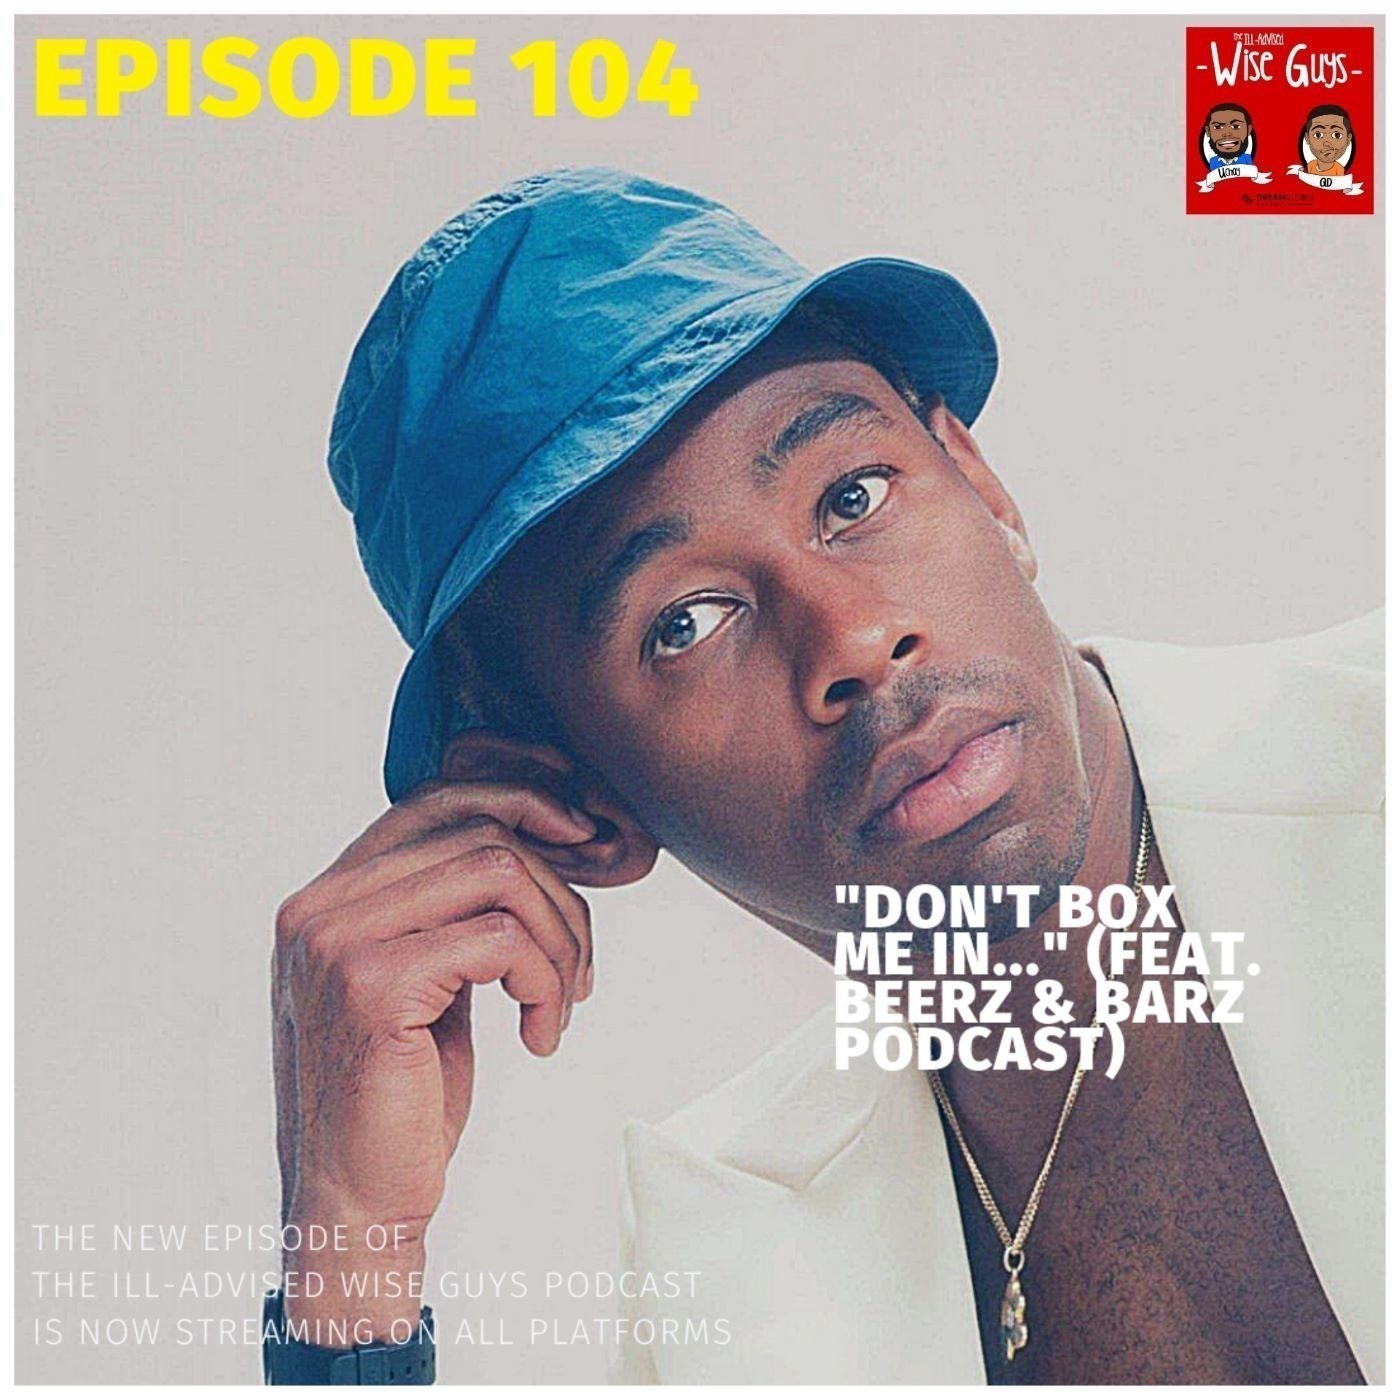 Episode 104 - "Don't Box Me In..." (Feat. Beerz & Barz Podcast) Image